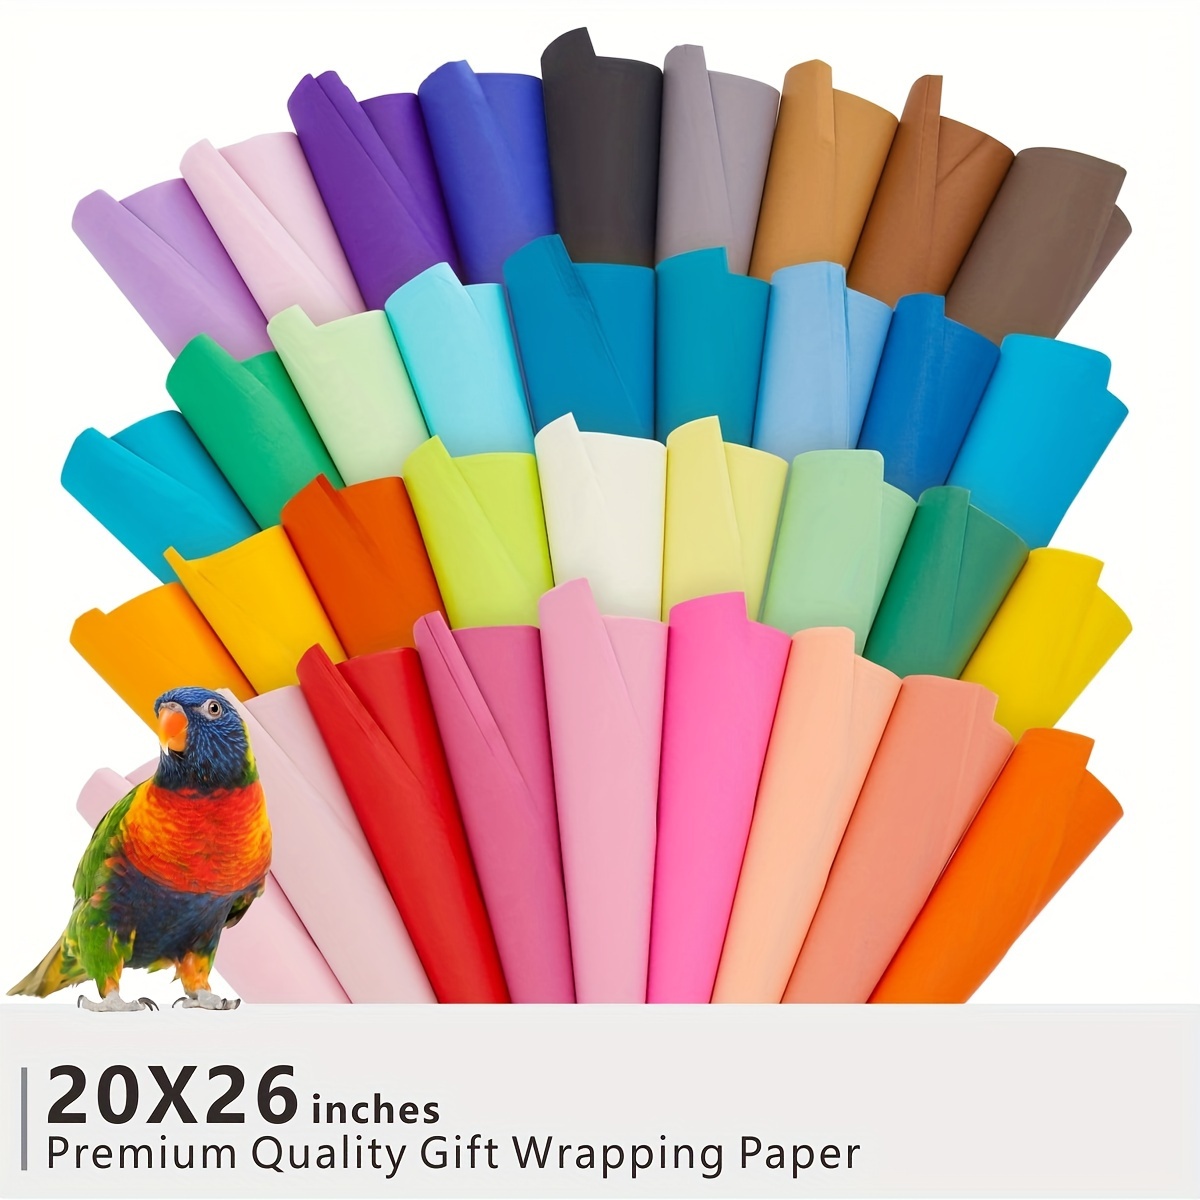 Craft Craze 100-Piece Premium Quality Tissue Gift Wrapping Paper Crafts,  Packing and More, 20 x 26 inches (100 Sheets), Assorted Colors (1-Pack) - Tissue  Paper